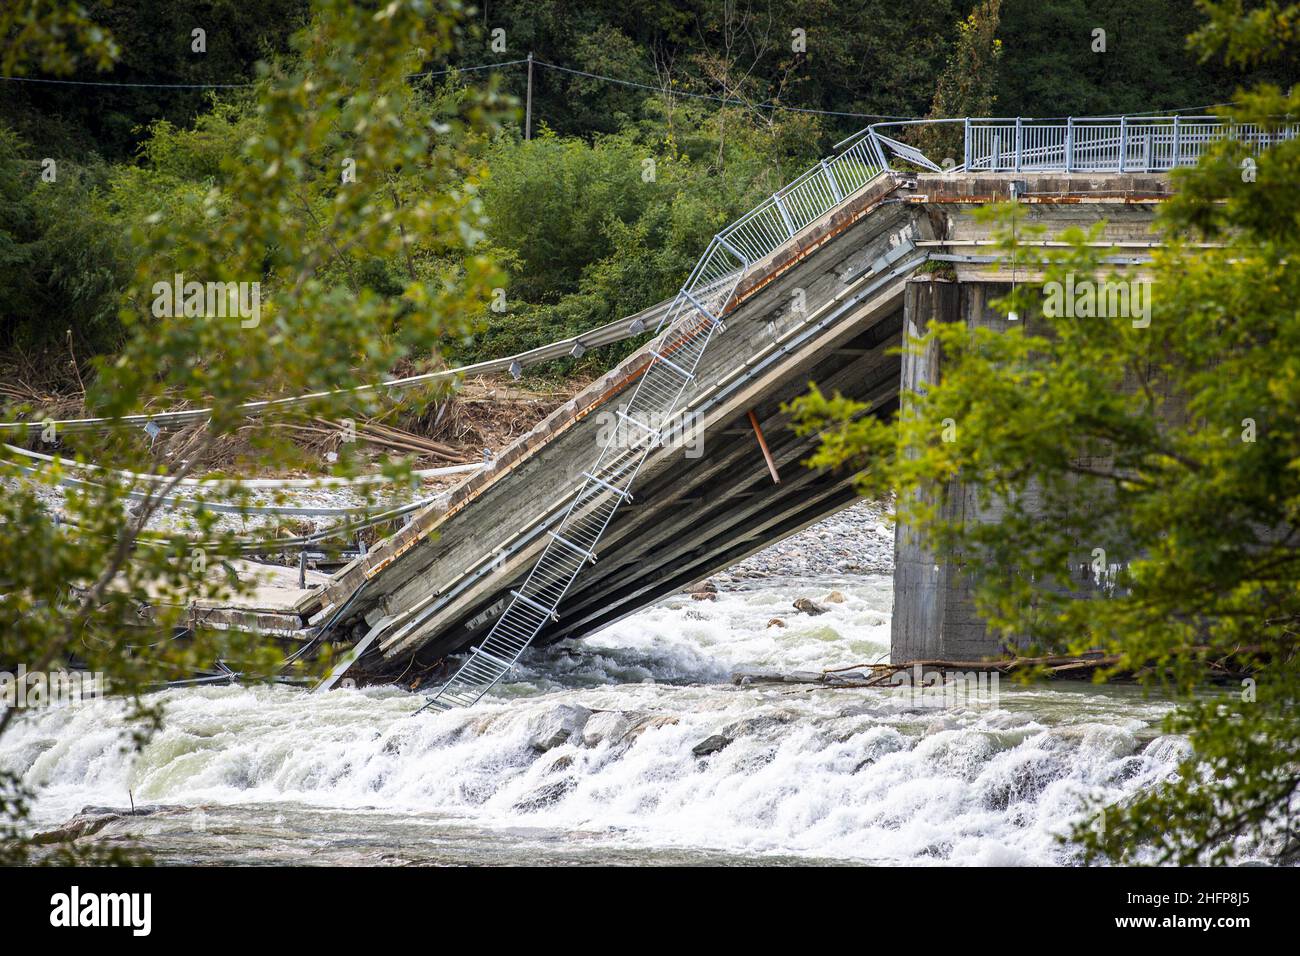 LaPresse/Nicol&#xf2; Campo October 5, 2020 Romagnano Sesia (Novara) (Italy) News Weather warnings in the Piedmont region in the pic: the bridge destroyed by the flood of the Sesia river Stock Photo